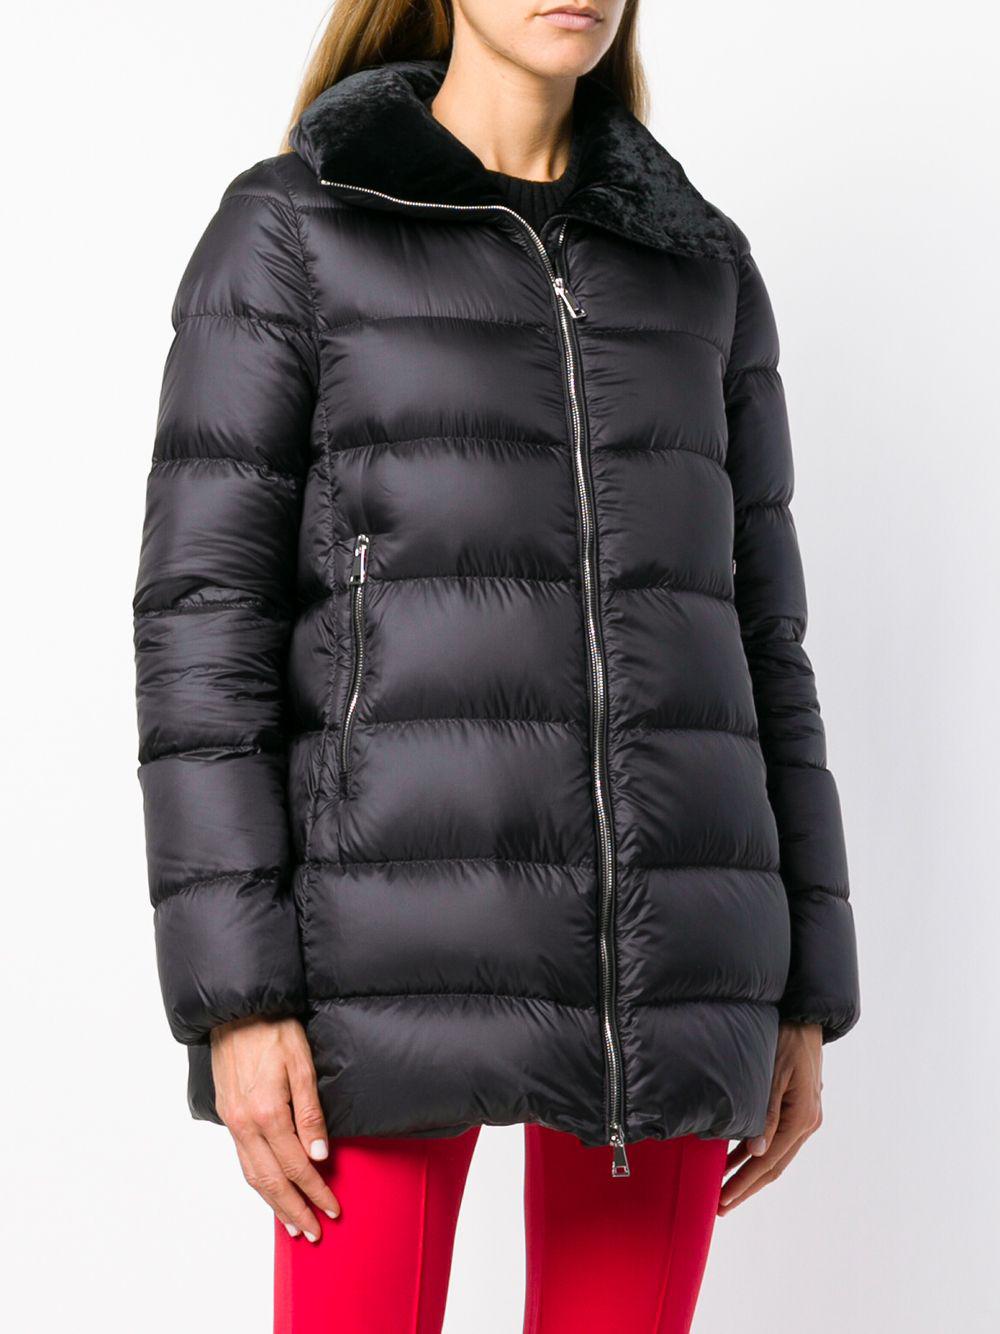 Moncler Puffer Jacket in Black - Lyst